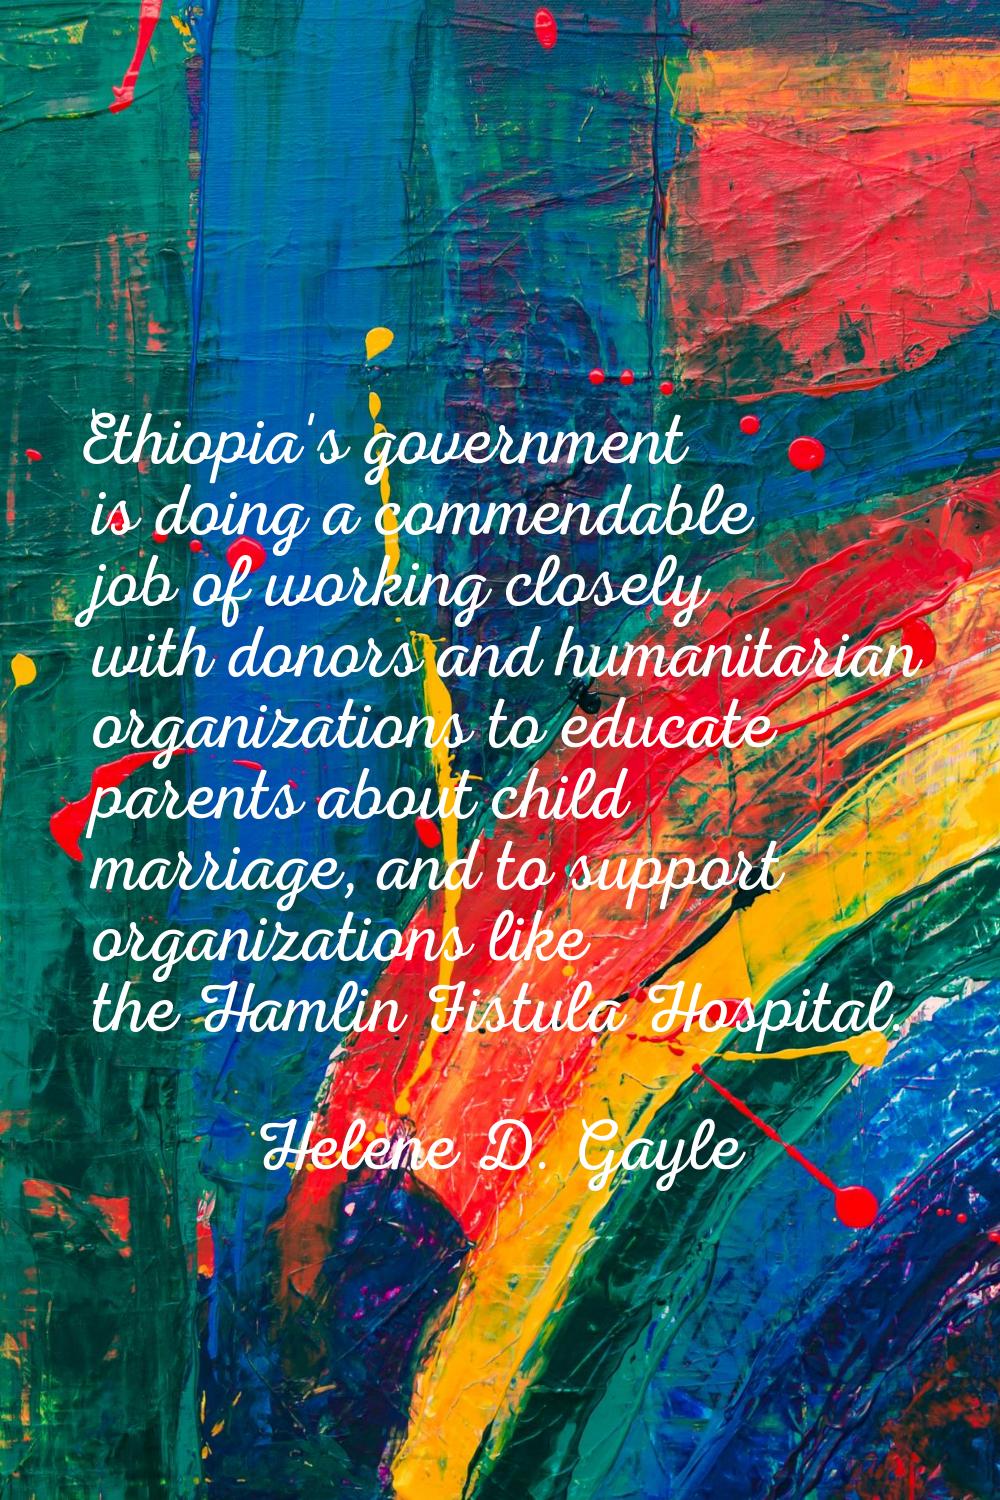 Ethiopia's government is doing a commendable job of working closely with donors and humanitarian or